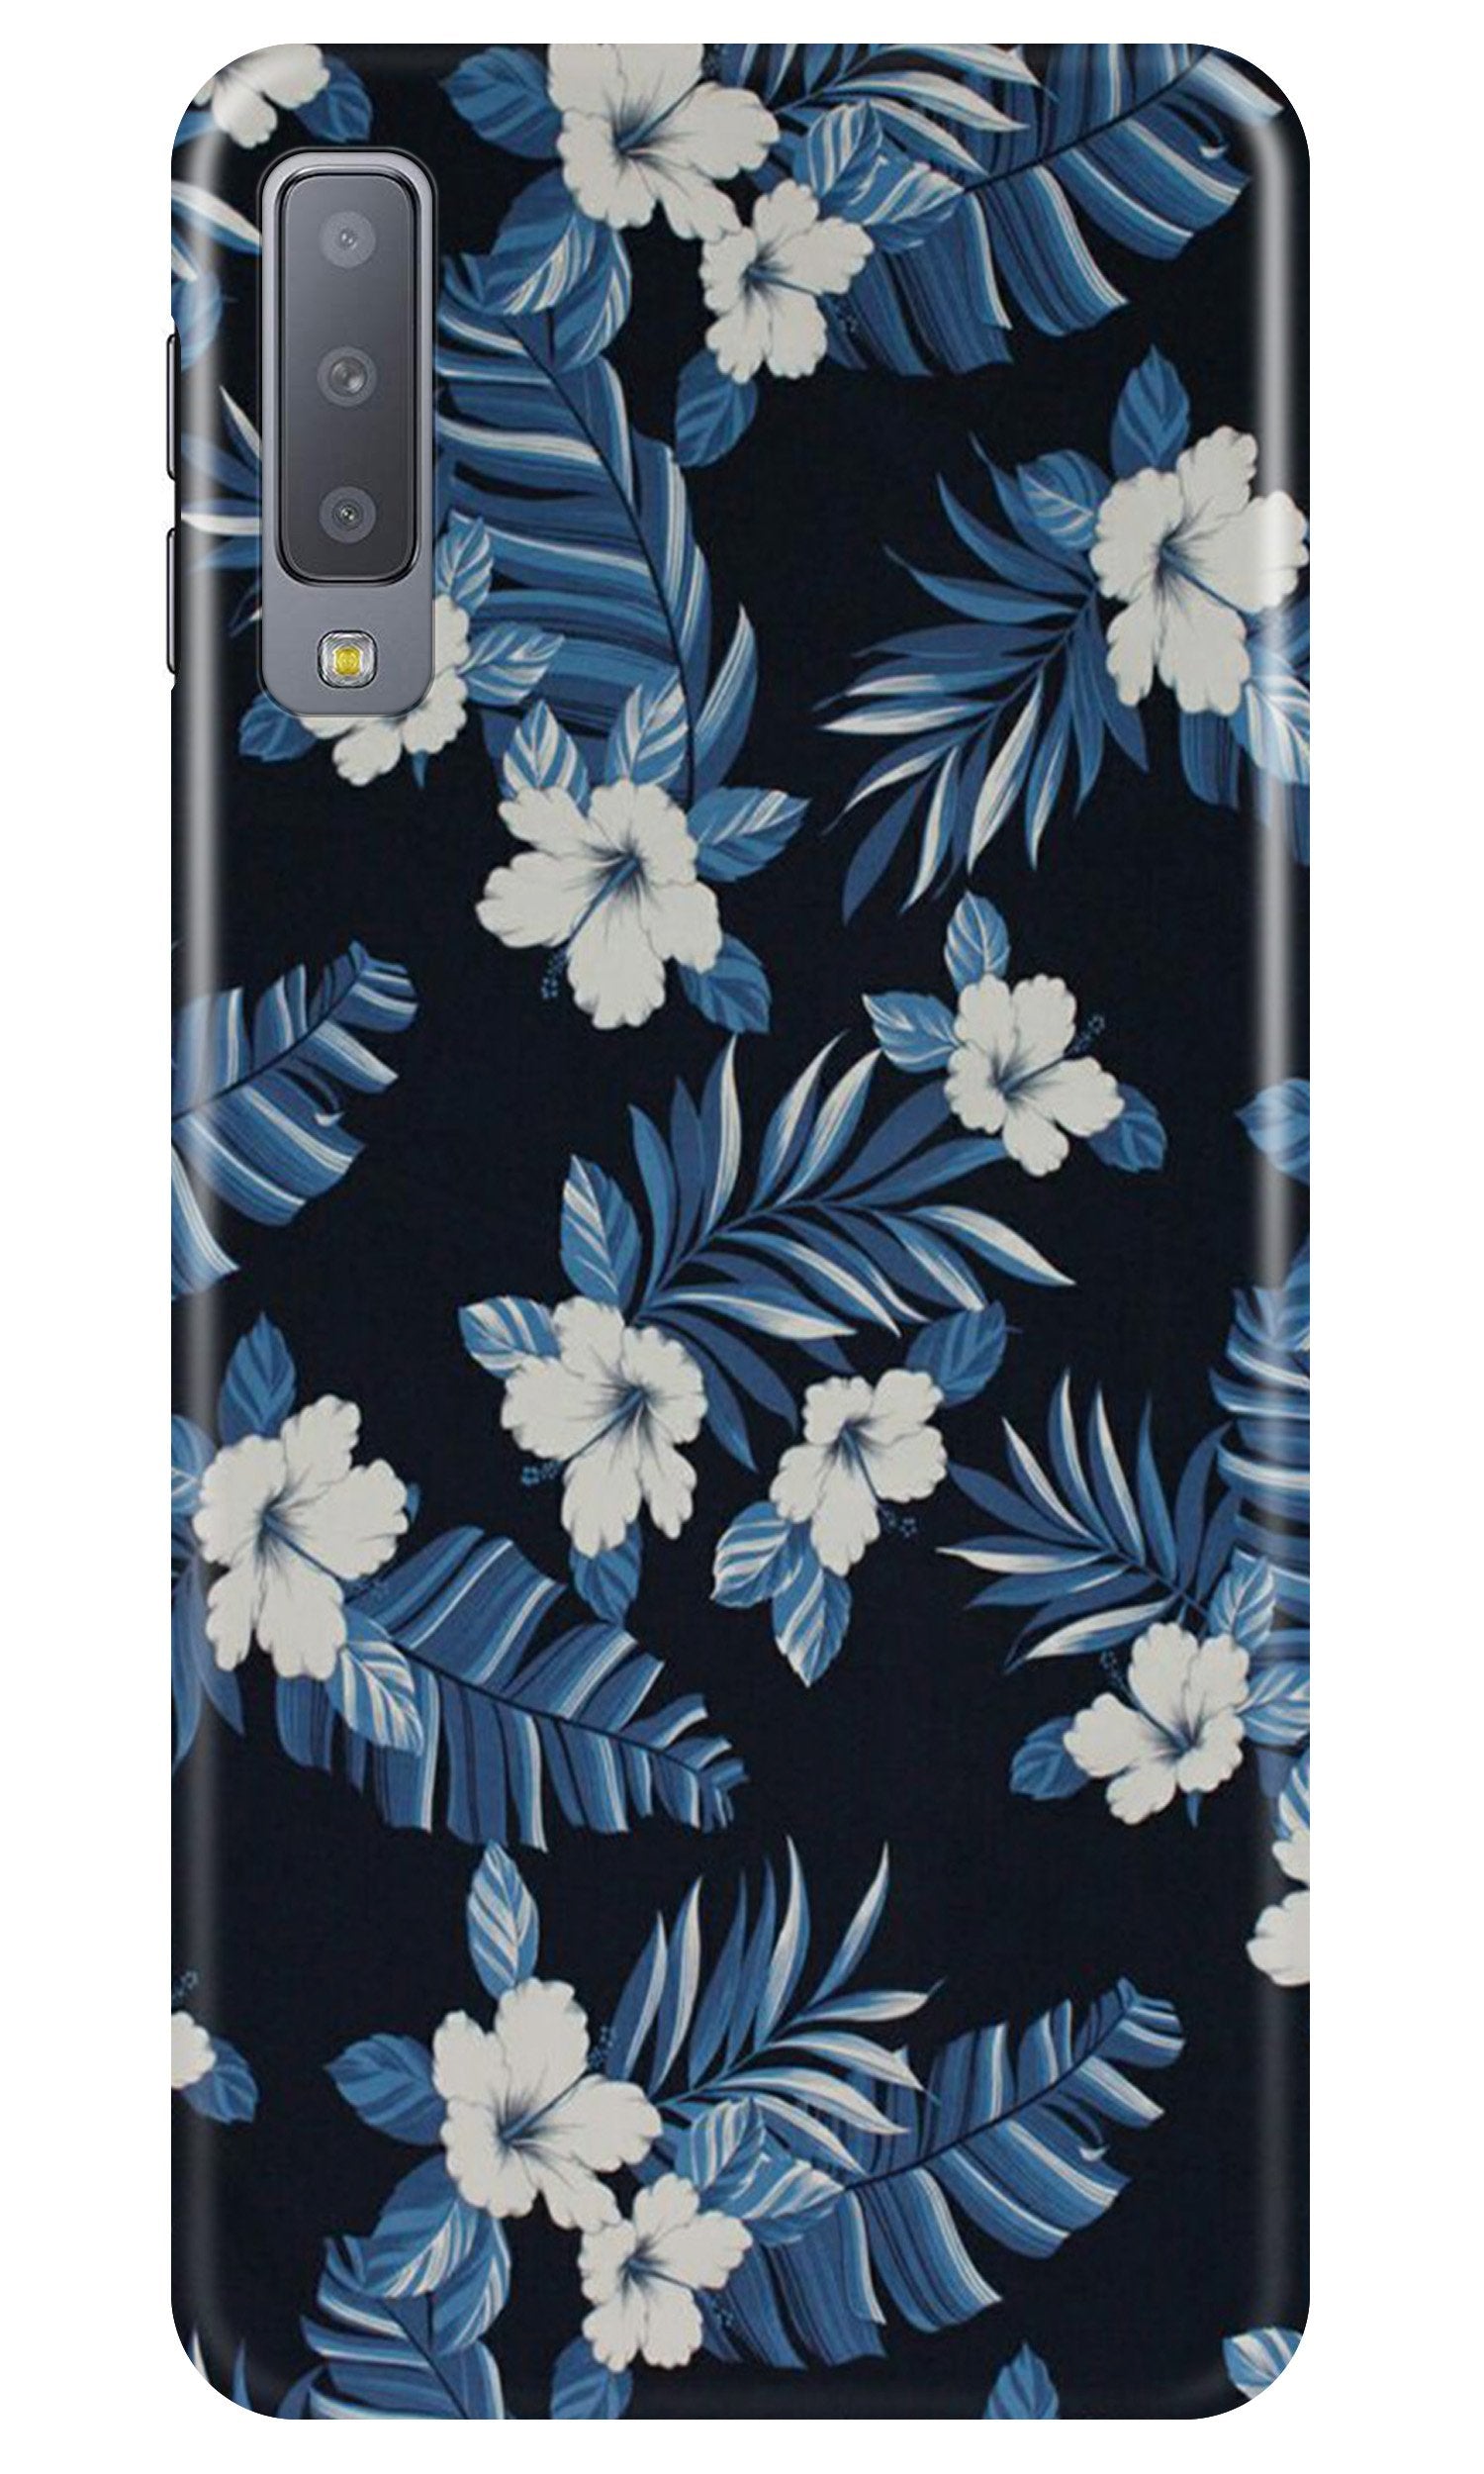 White flowers Blue Background2 Case for Galaxy A7 (2018)